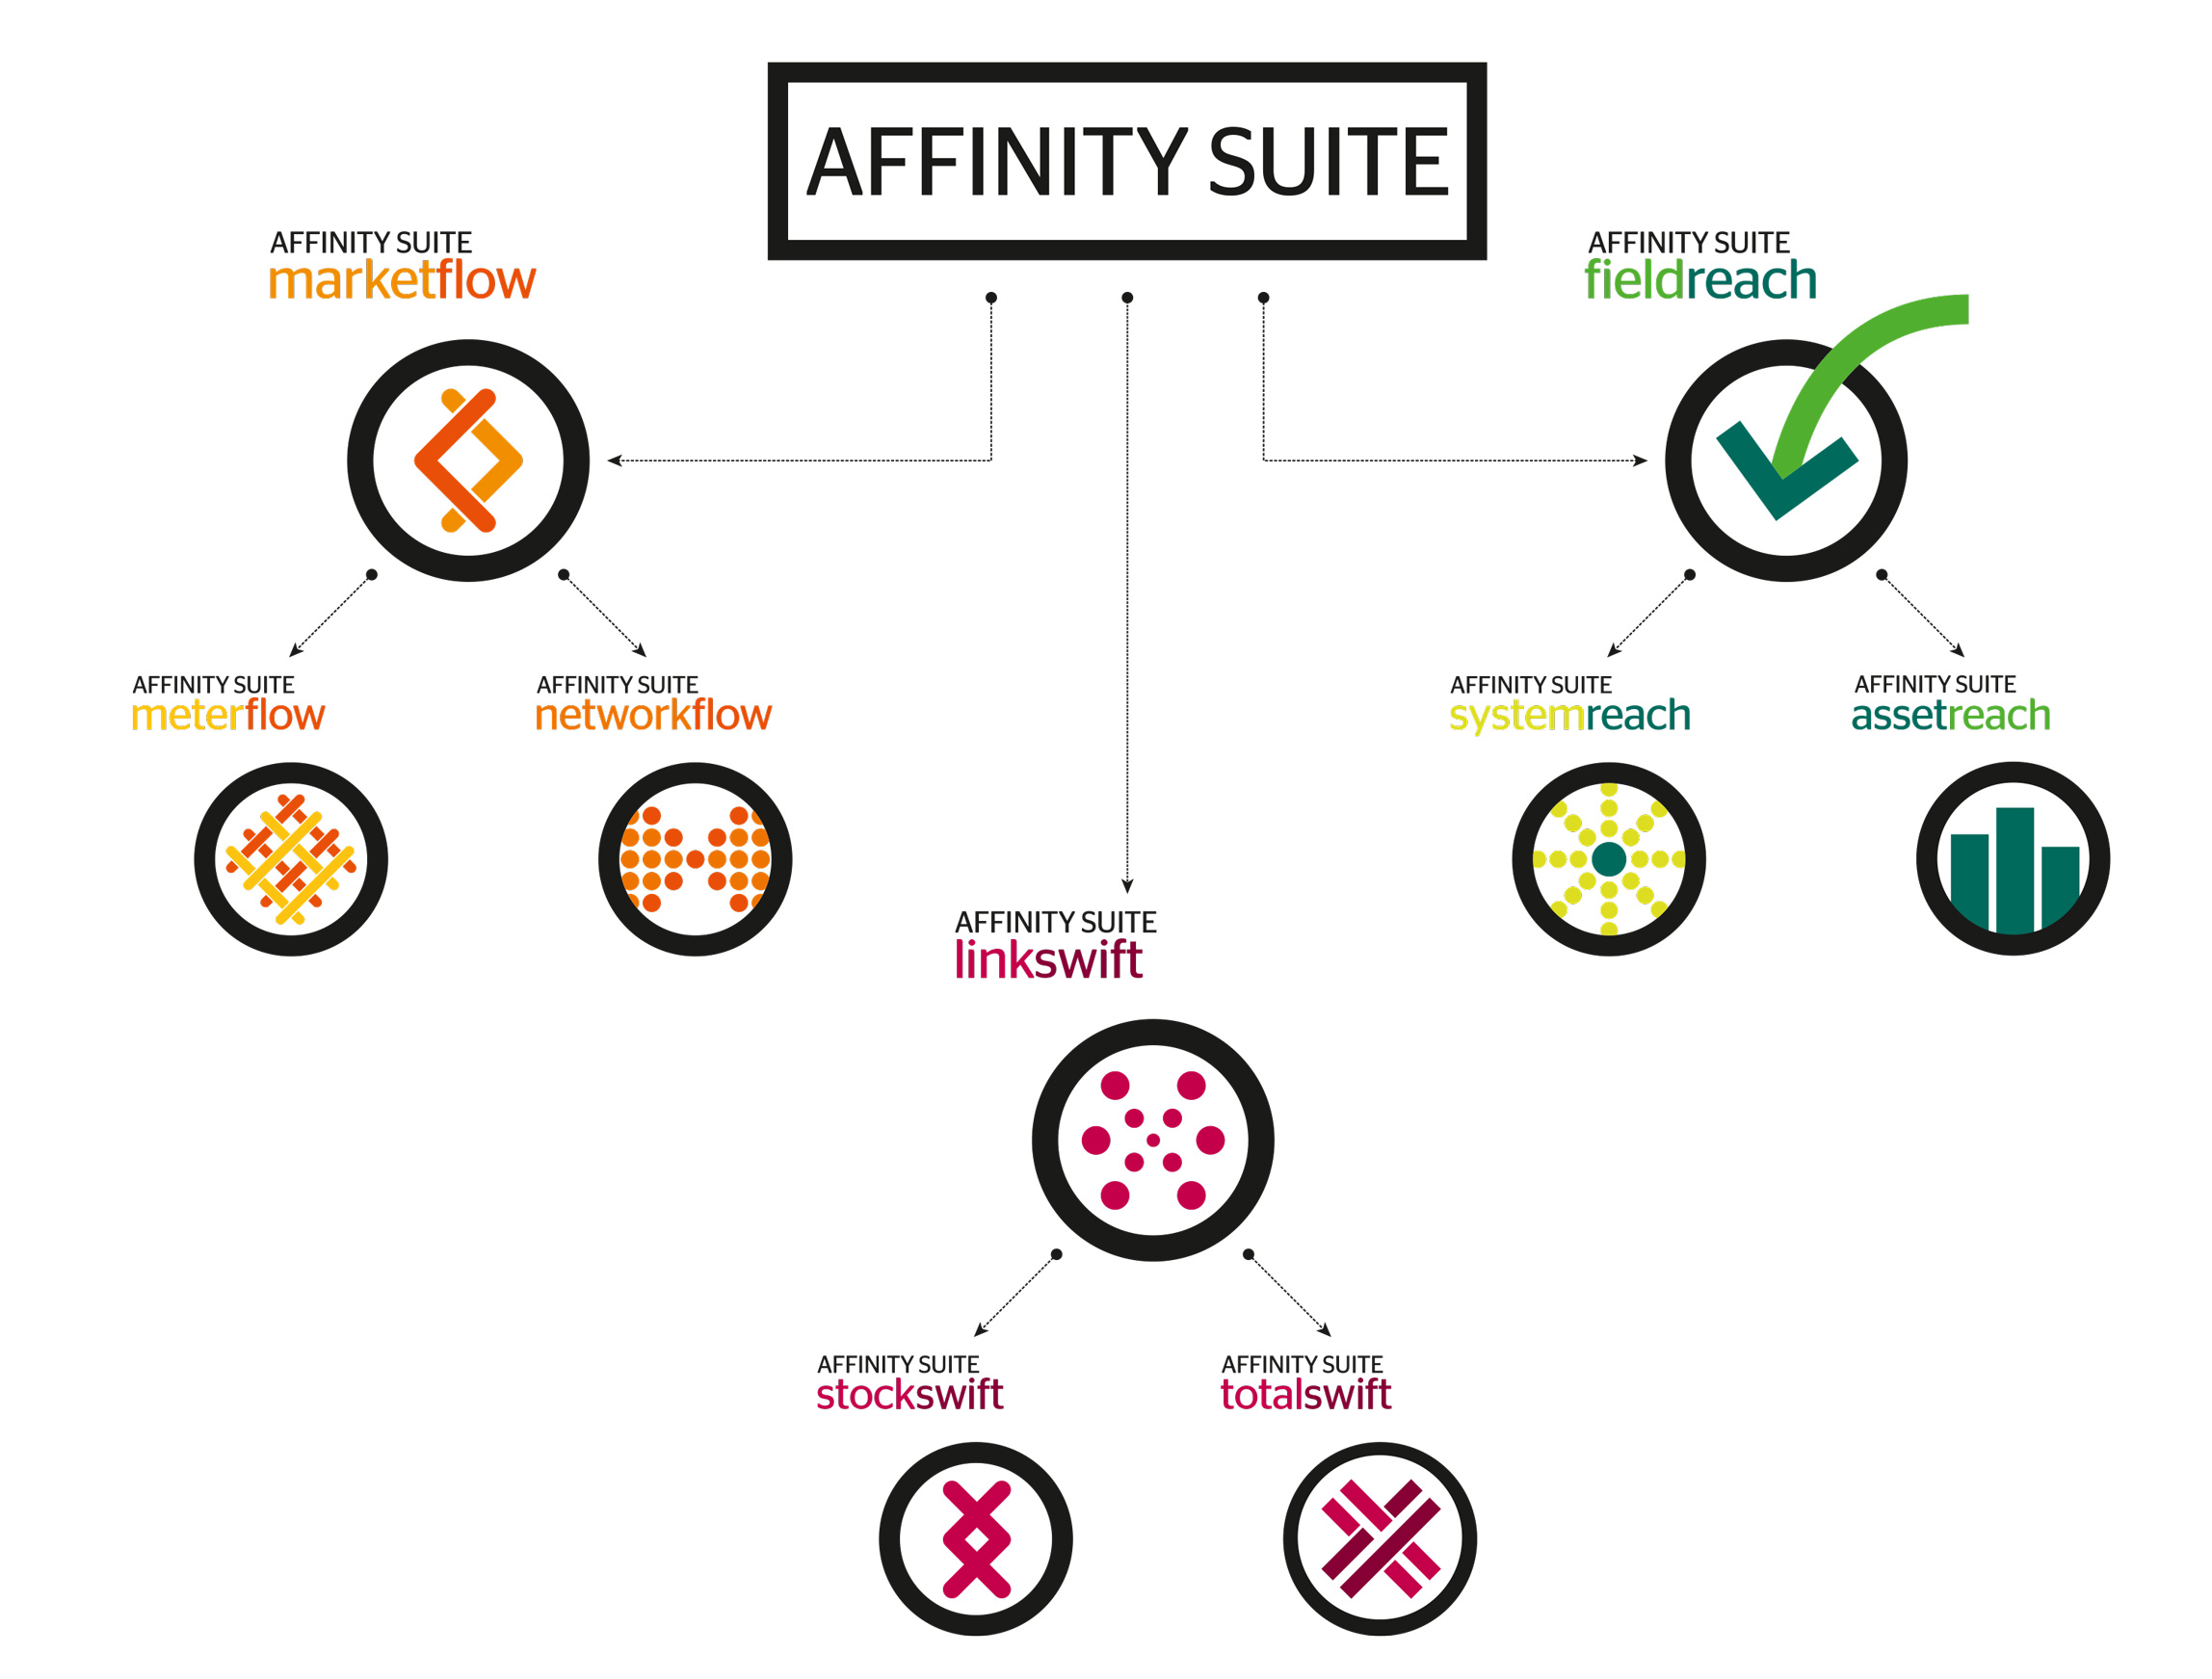 amt sybex technology rebrand product affinity suite naming architecture